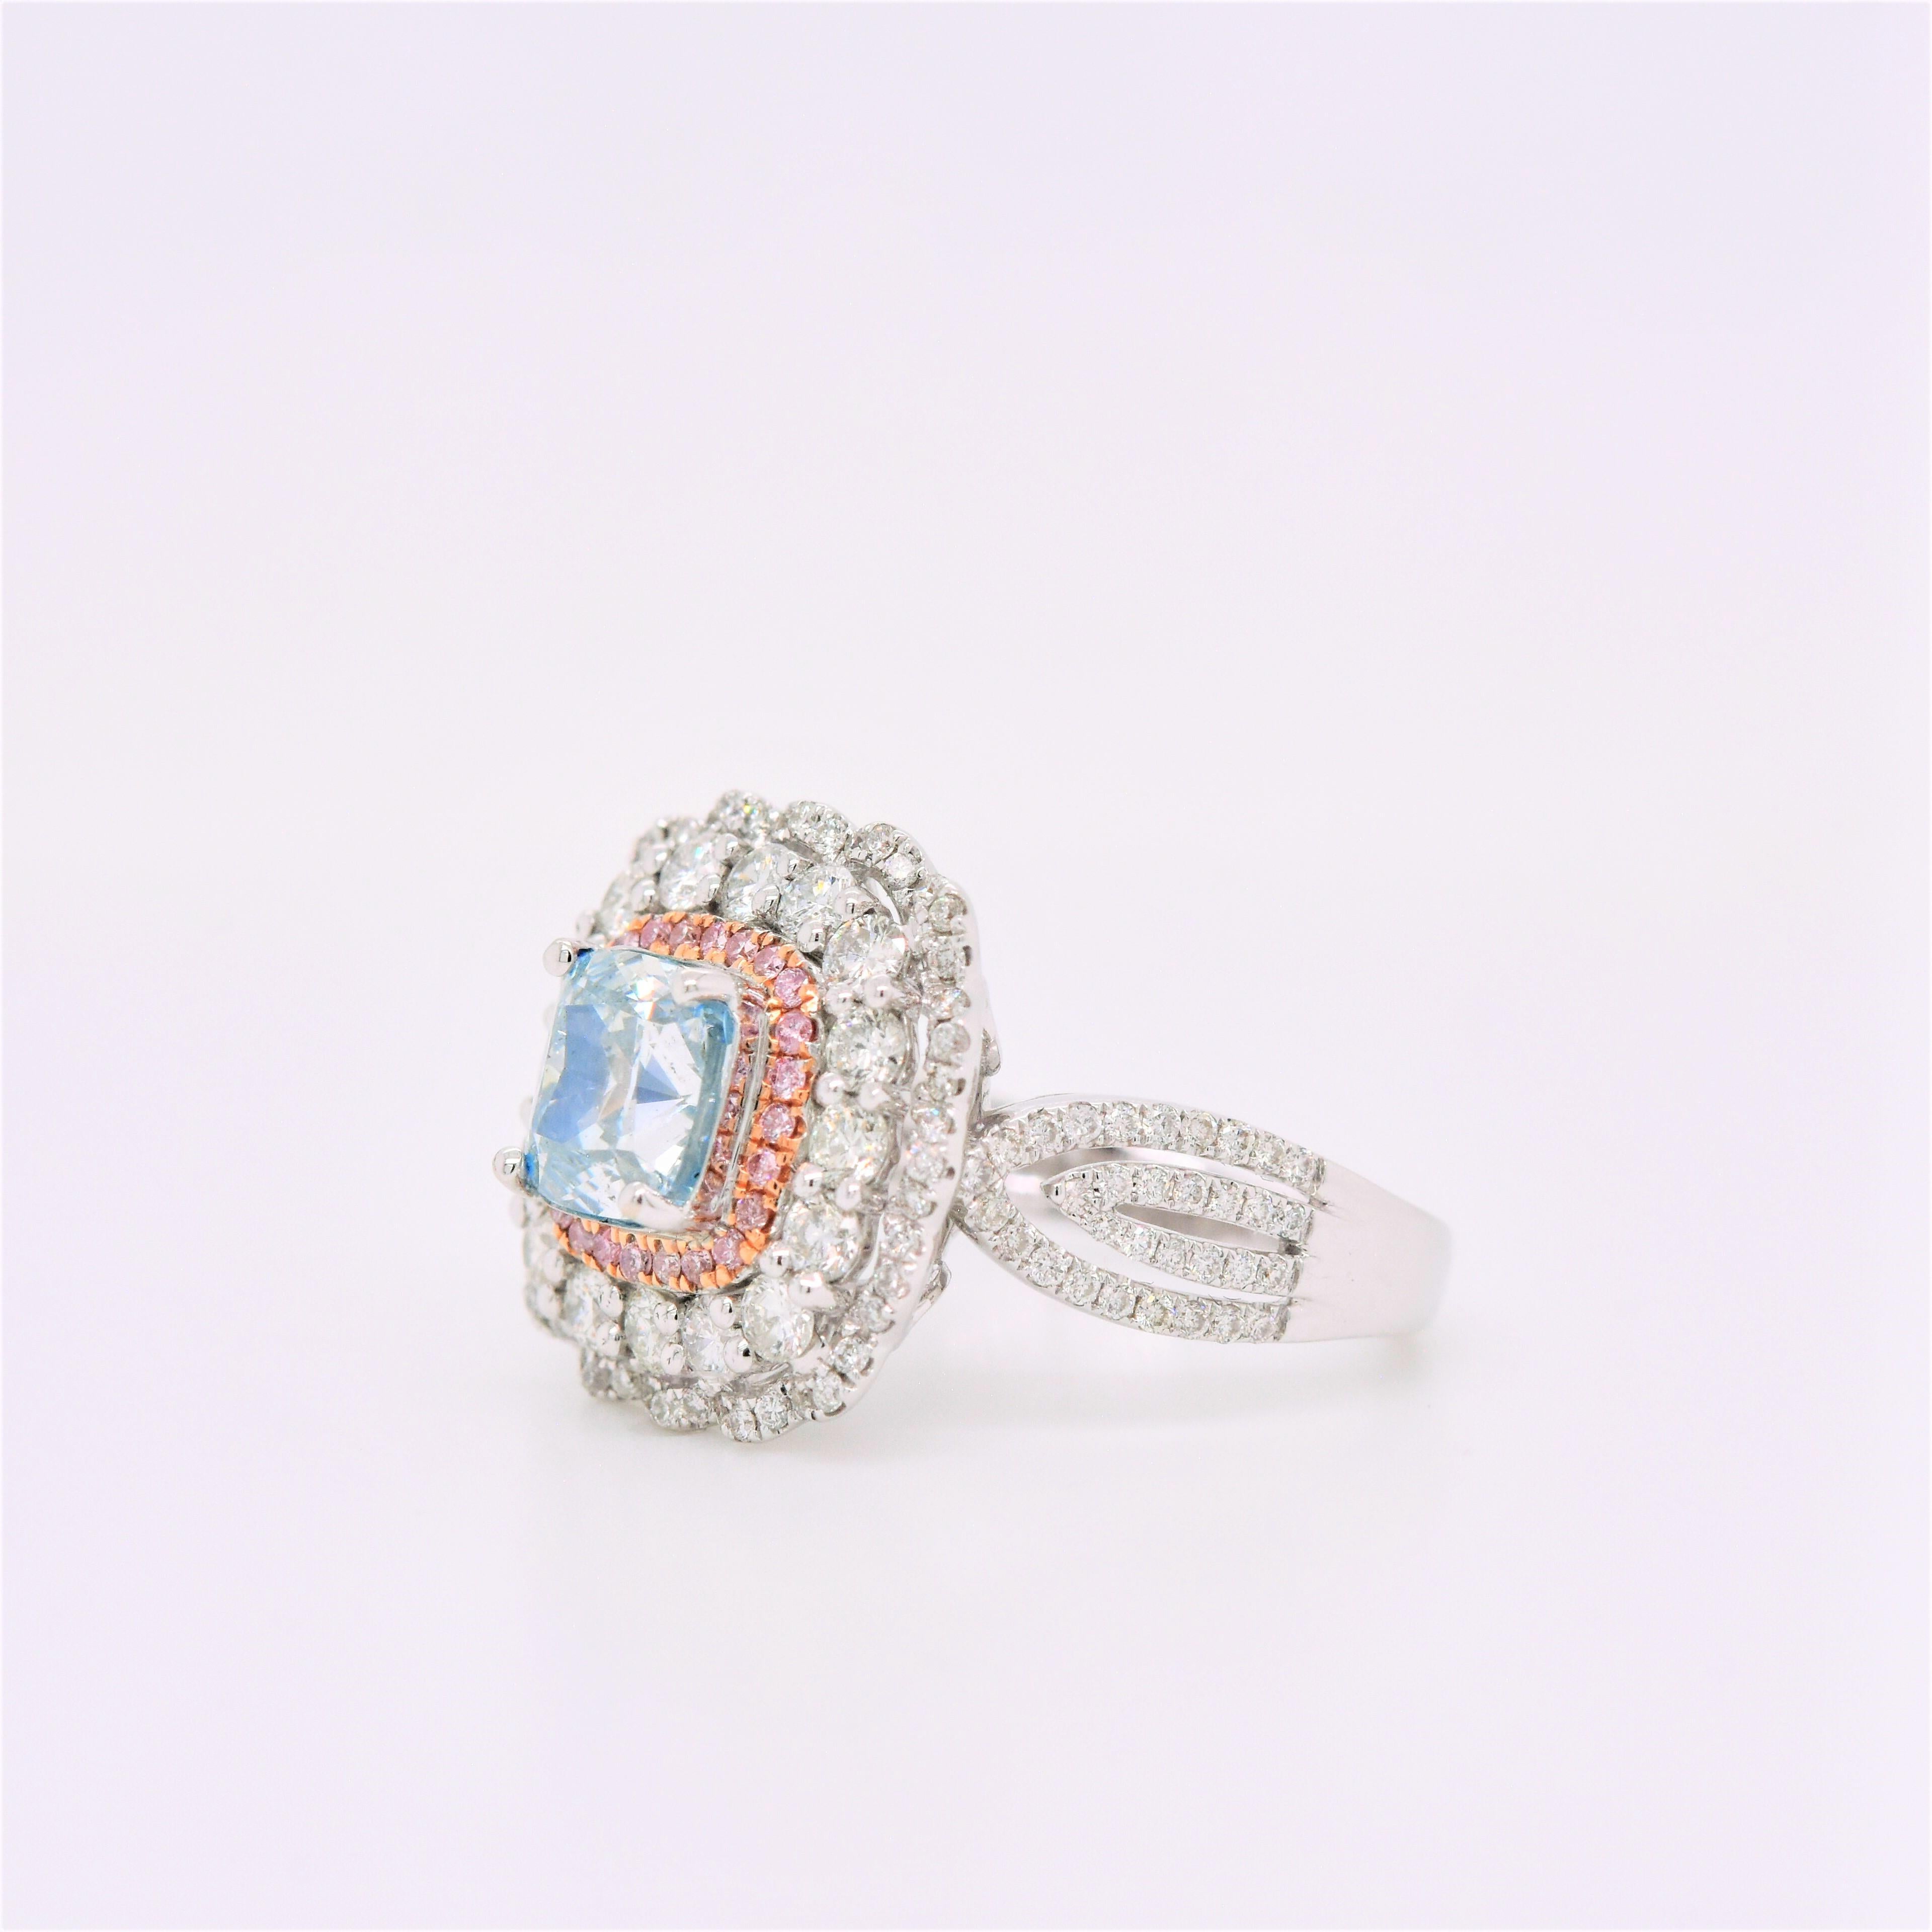 This engagement ring setting features a triple pave diamond white and rose gold halo surrounding the center Natural Fancy Blue Diamond, accented by a pave of Natural Fancy Pink Diamond stones around the center stone with open details. This setting